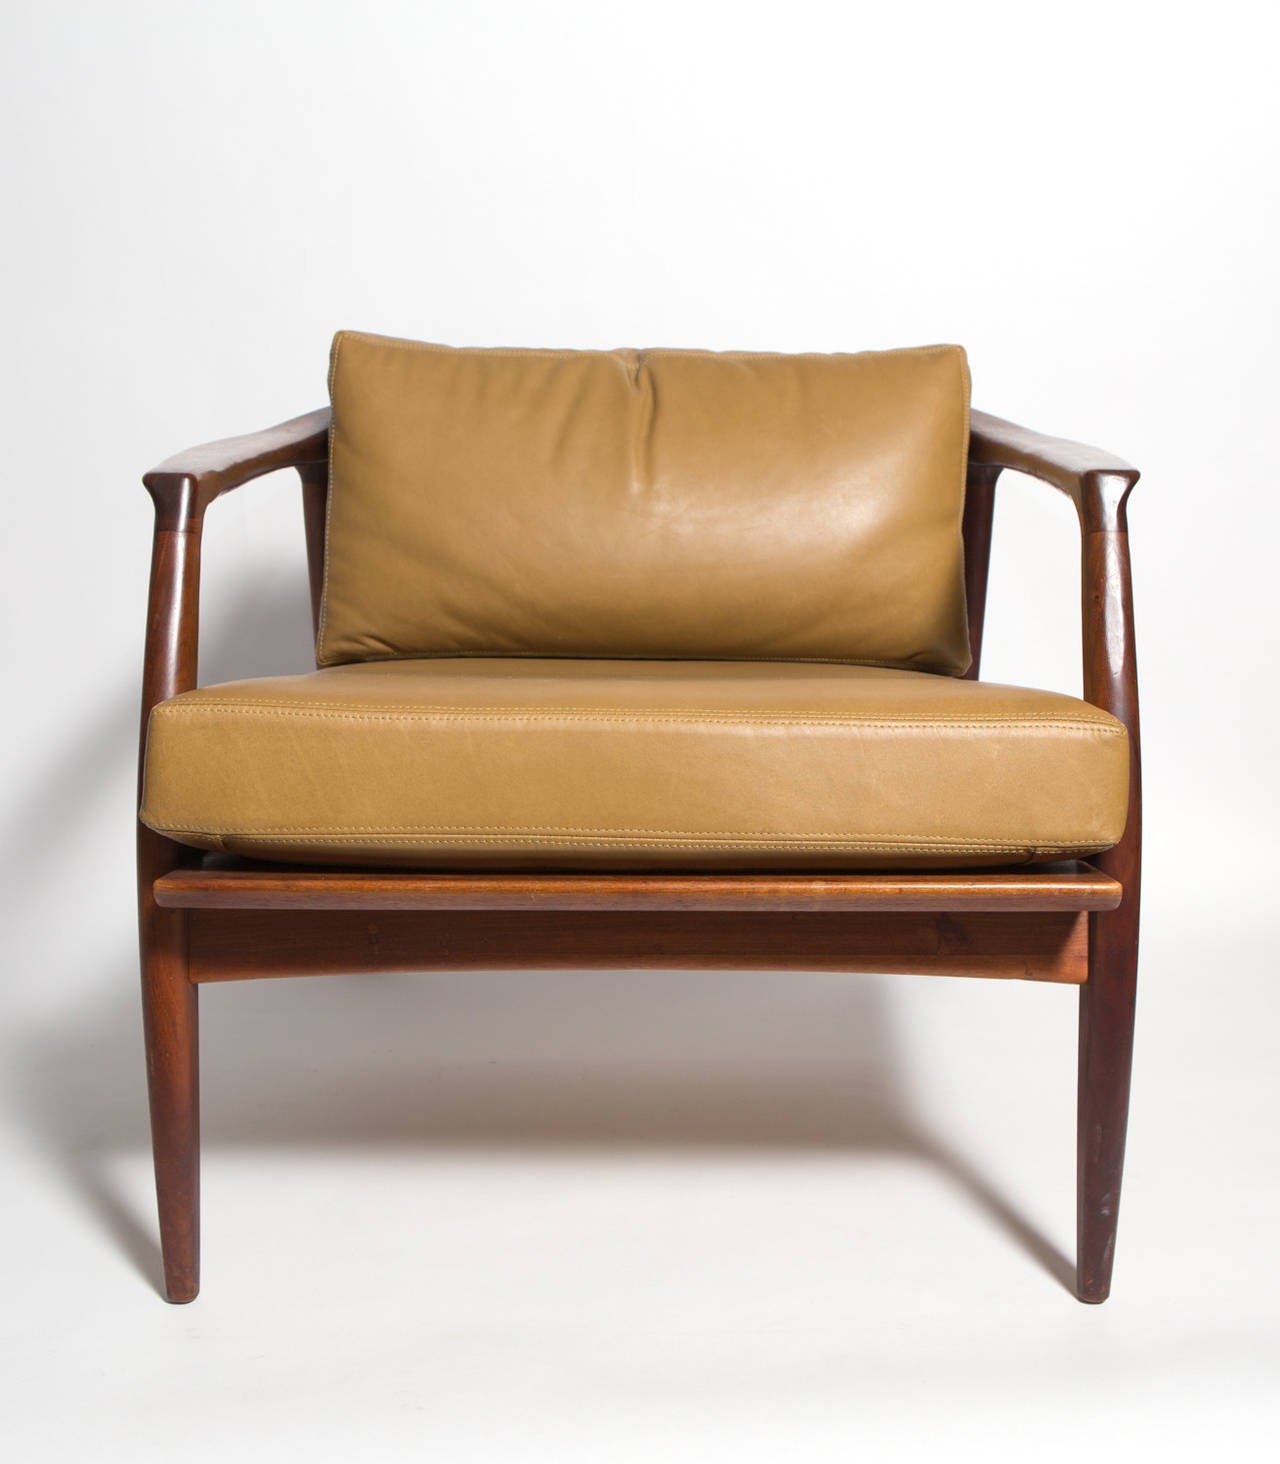 Mid-20th Century Milo Baughman Leather and Walnut Lounge Chair by Thayer Coggin, 1960s